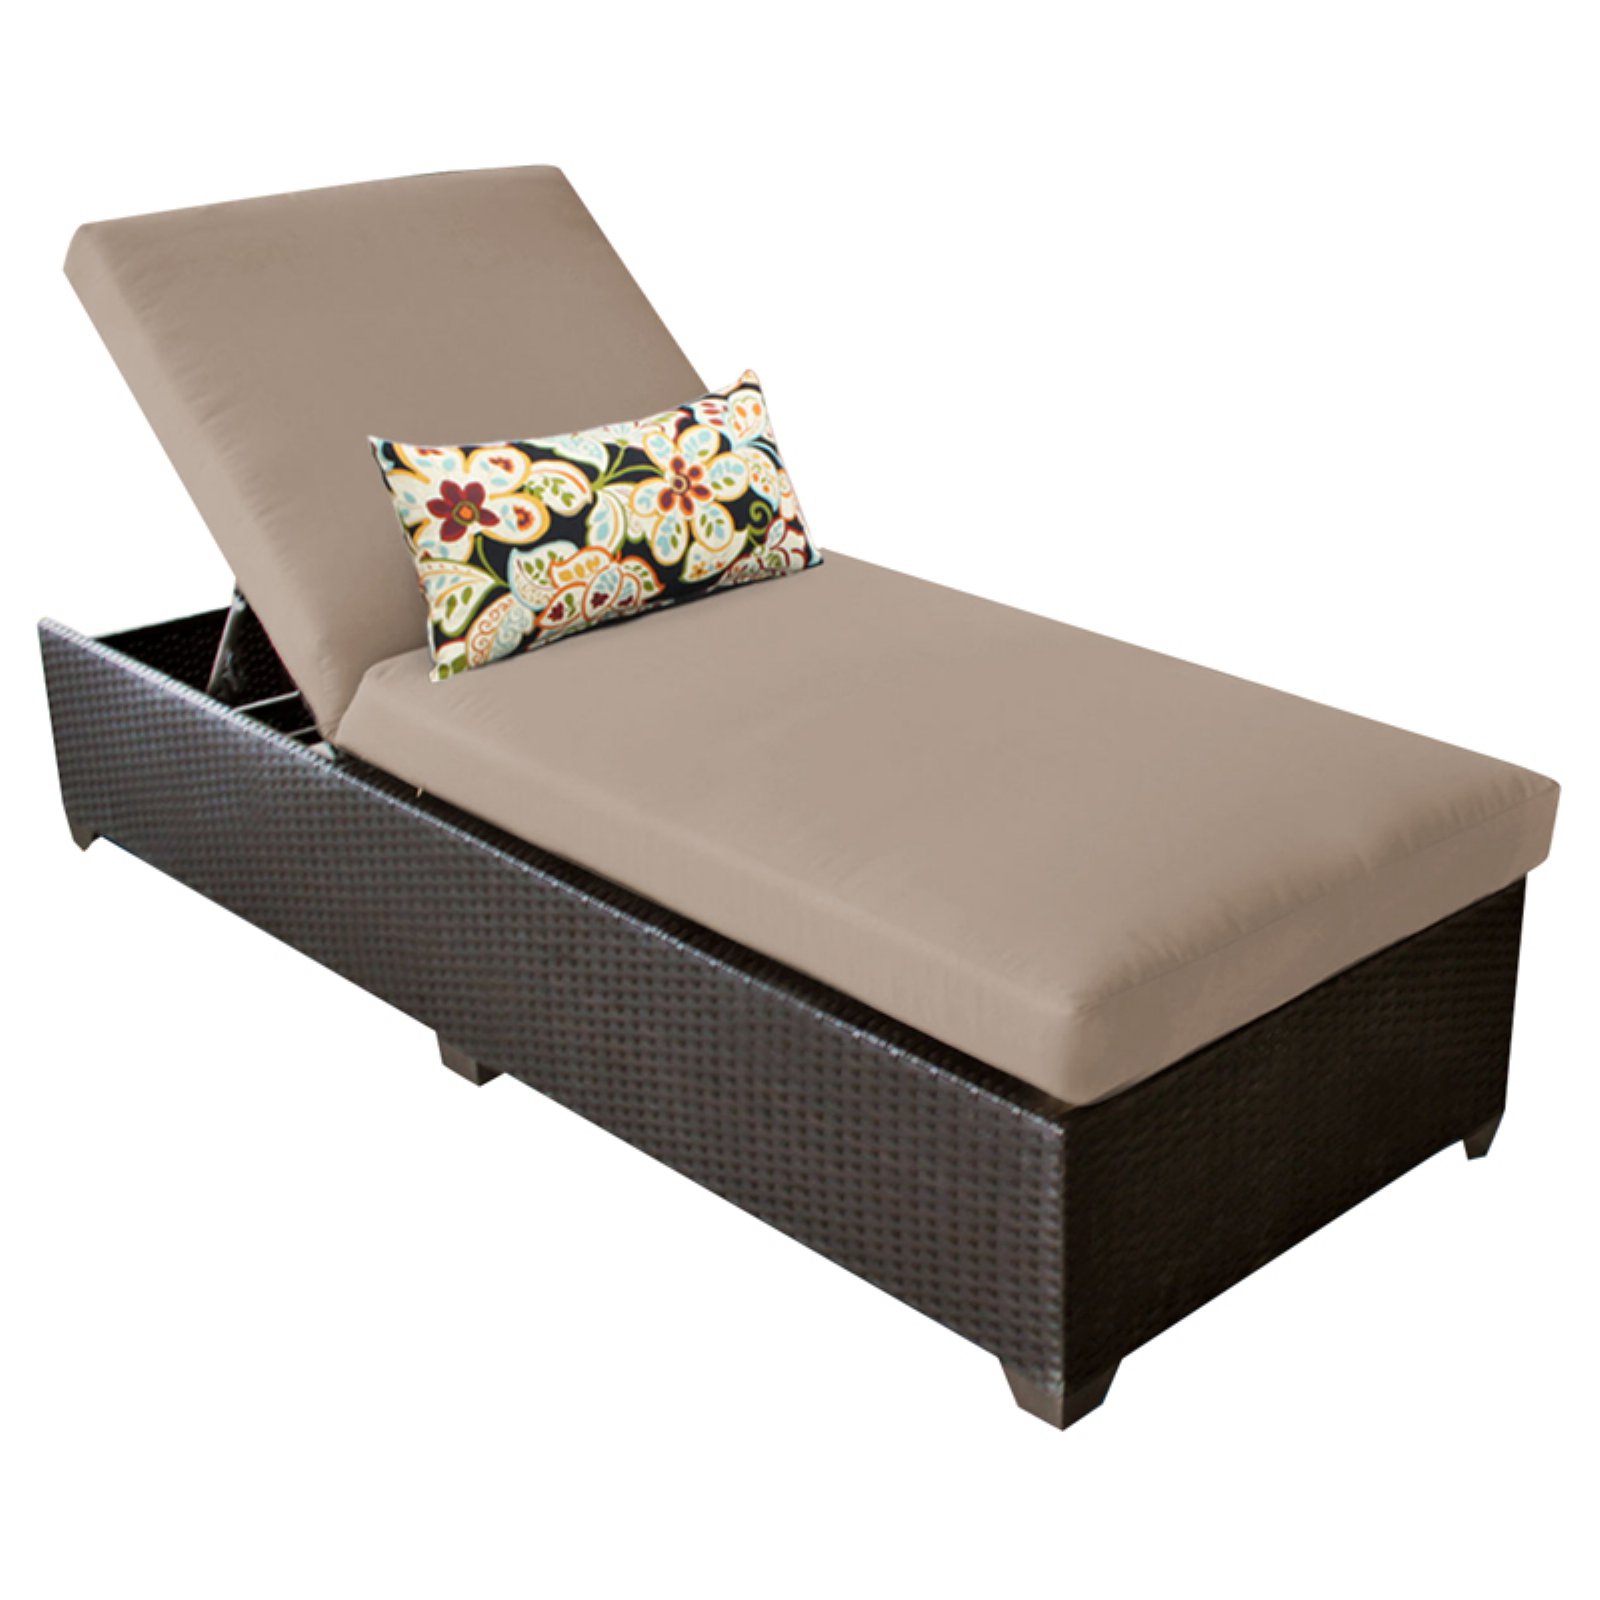 TK Classics Barbados Wicker Patio Chaise Lounge with Optional Side Table - image 1 of 10